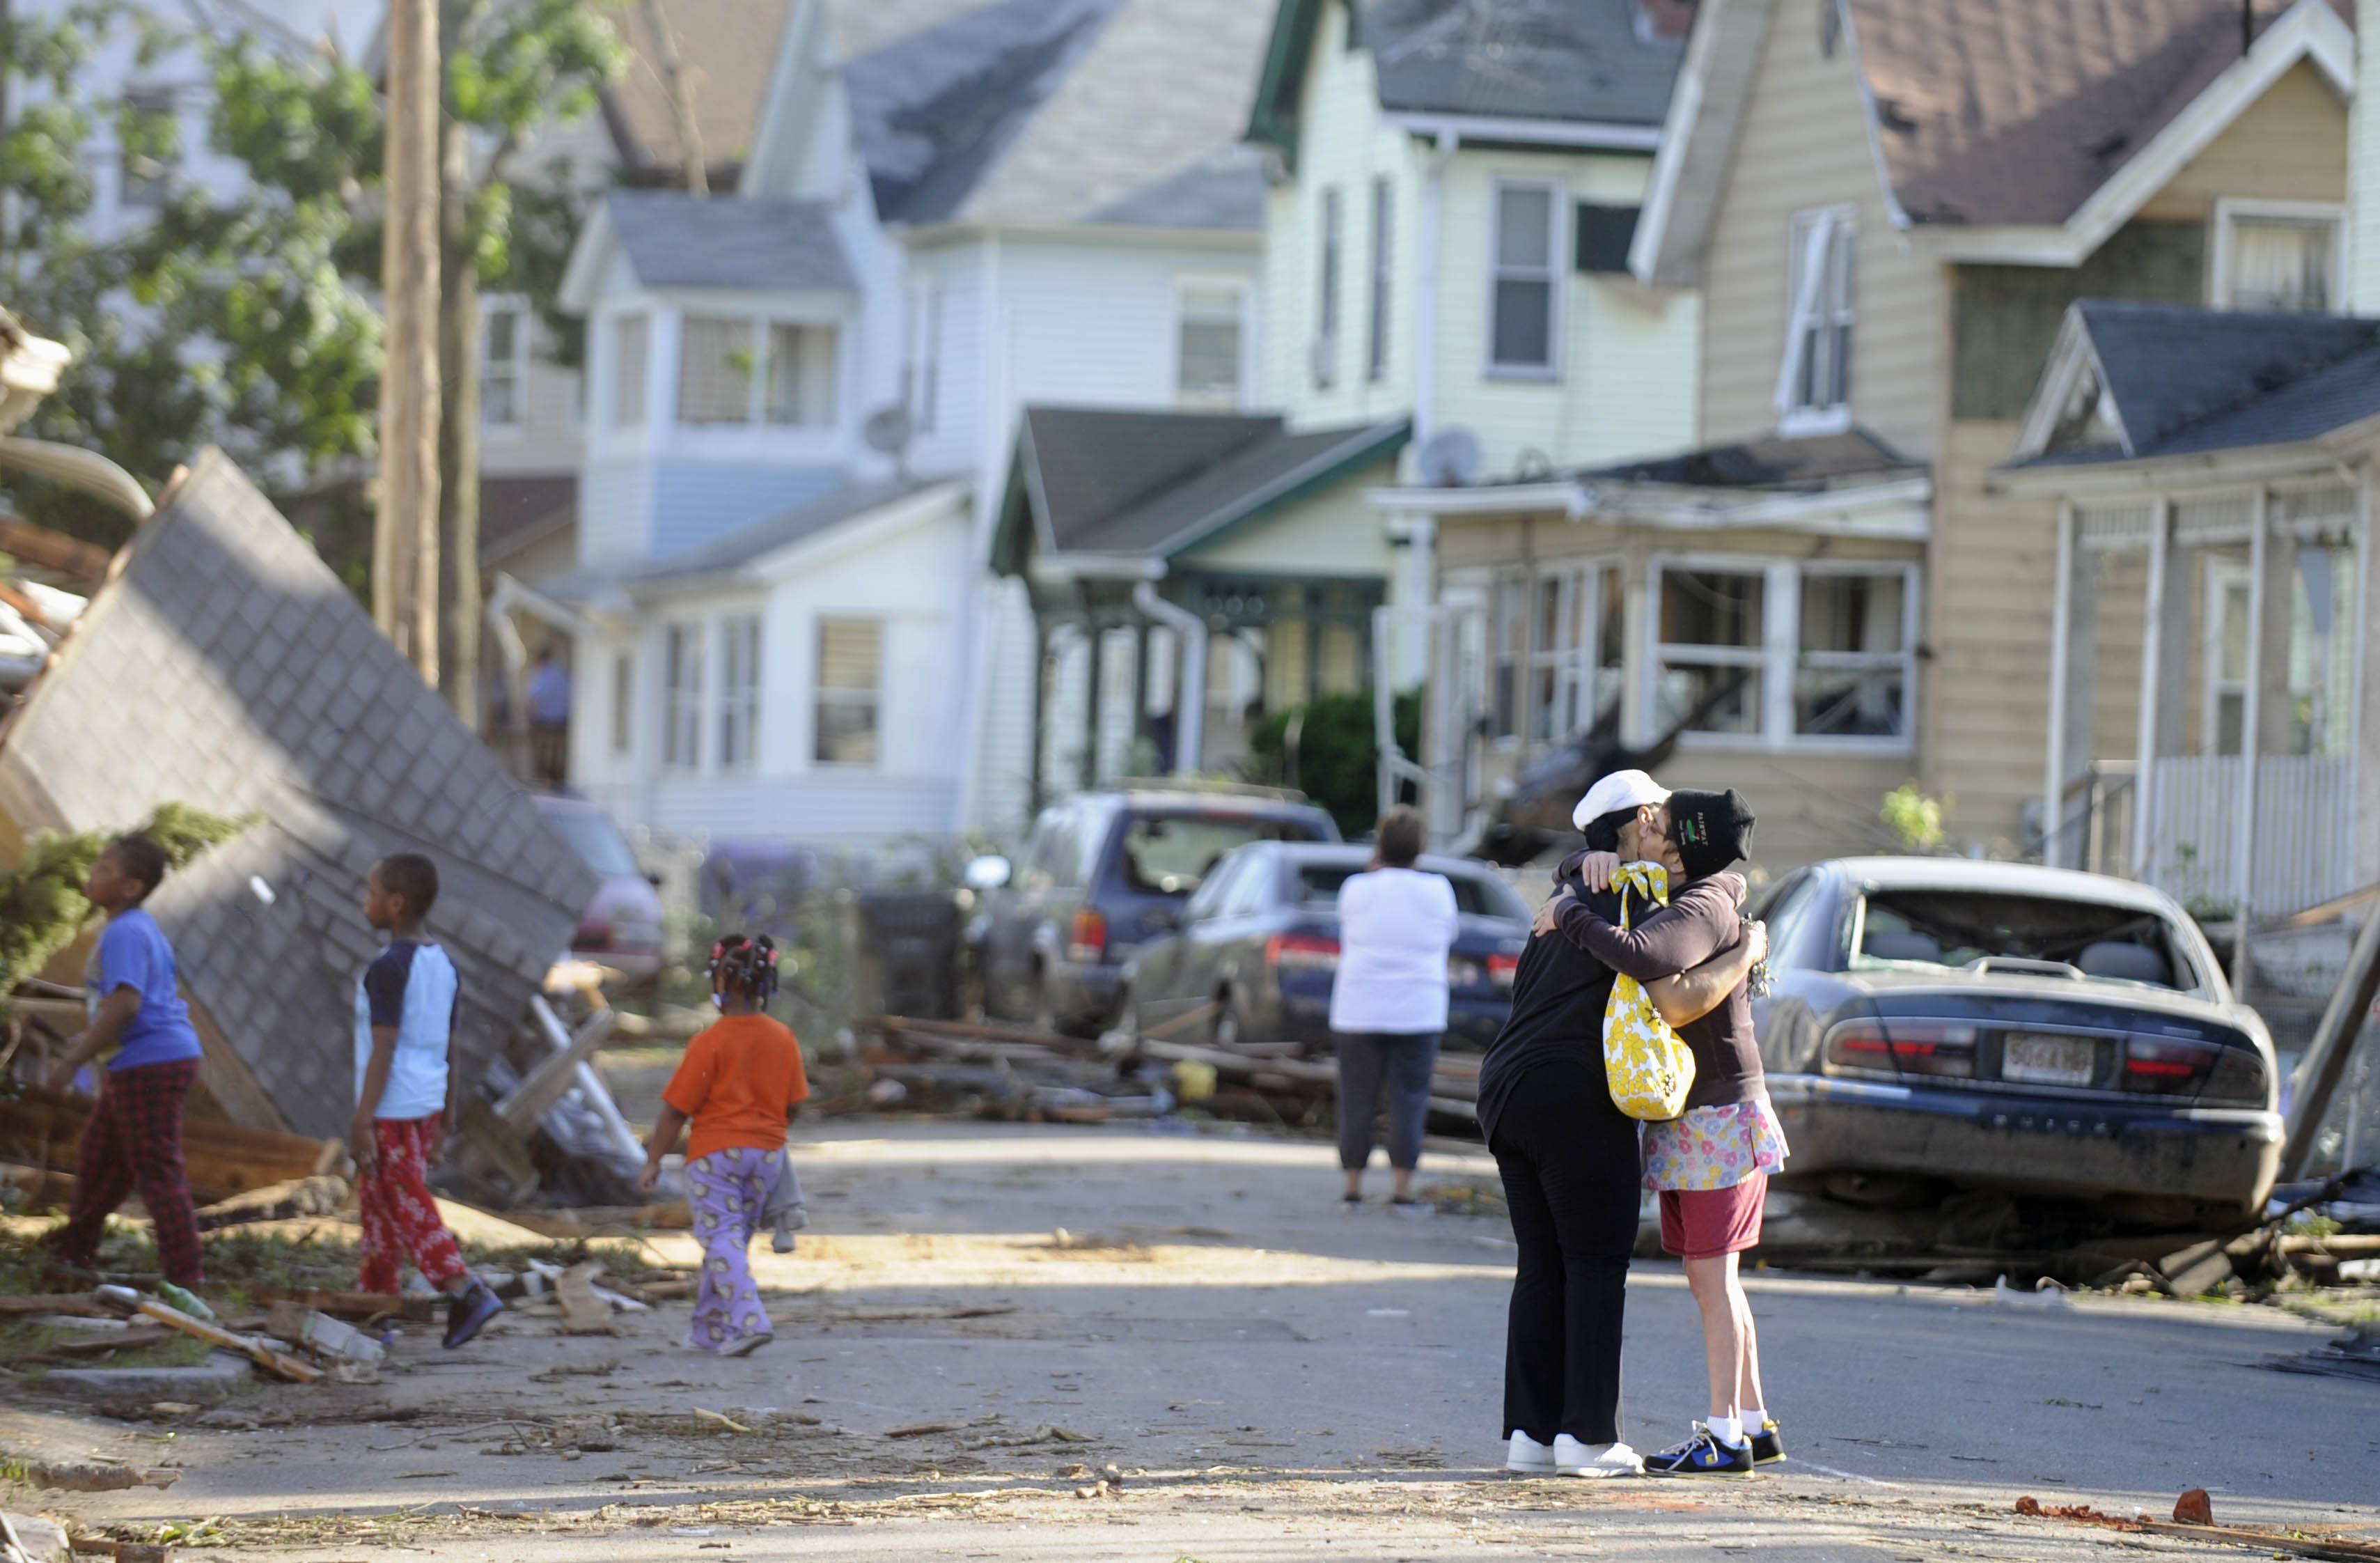 Providing Succor - The morning after the tornado residents comfort each other in Springfield.(Photo: AP Photo/Jessica Hill)